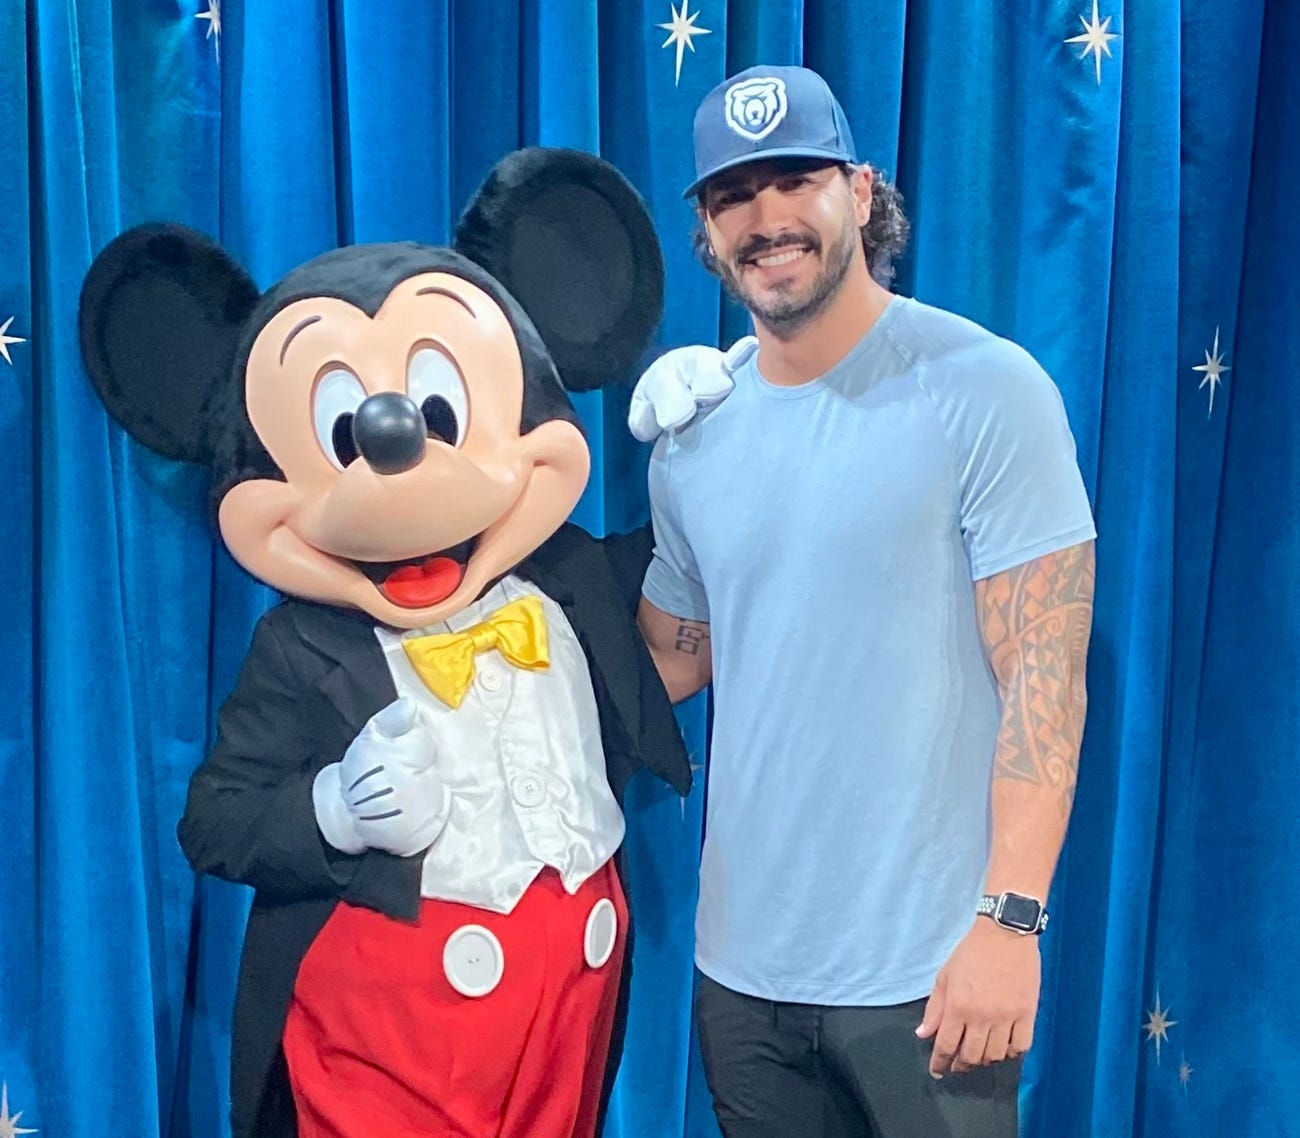 mickey mouse places a gloved hand on a smiling man in a blue t-shirt and baseball cap